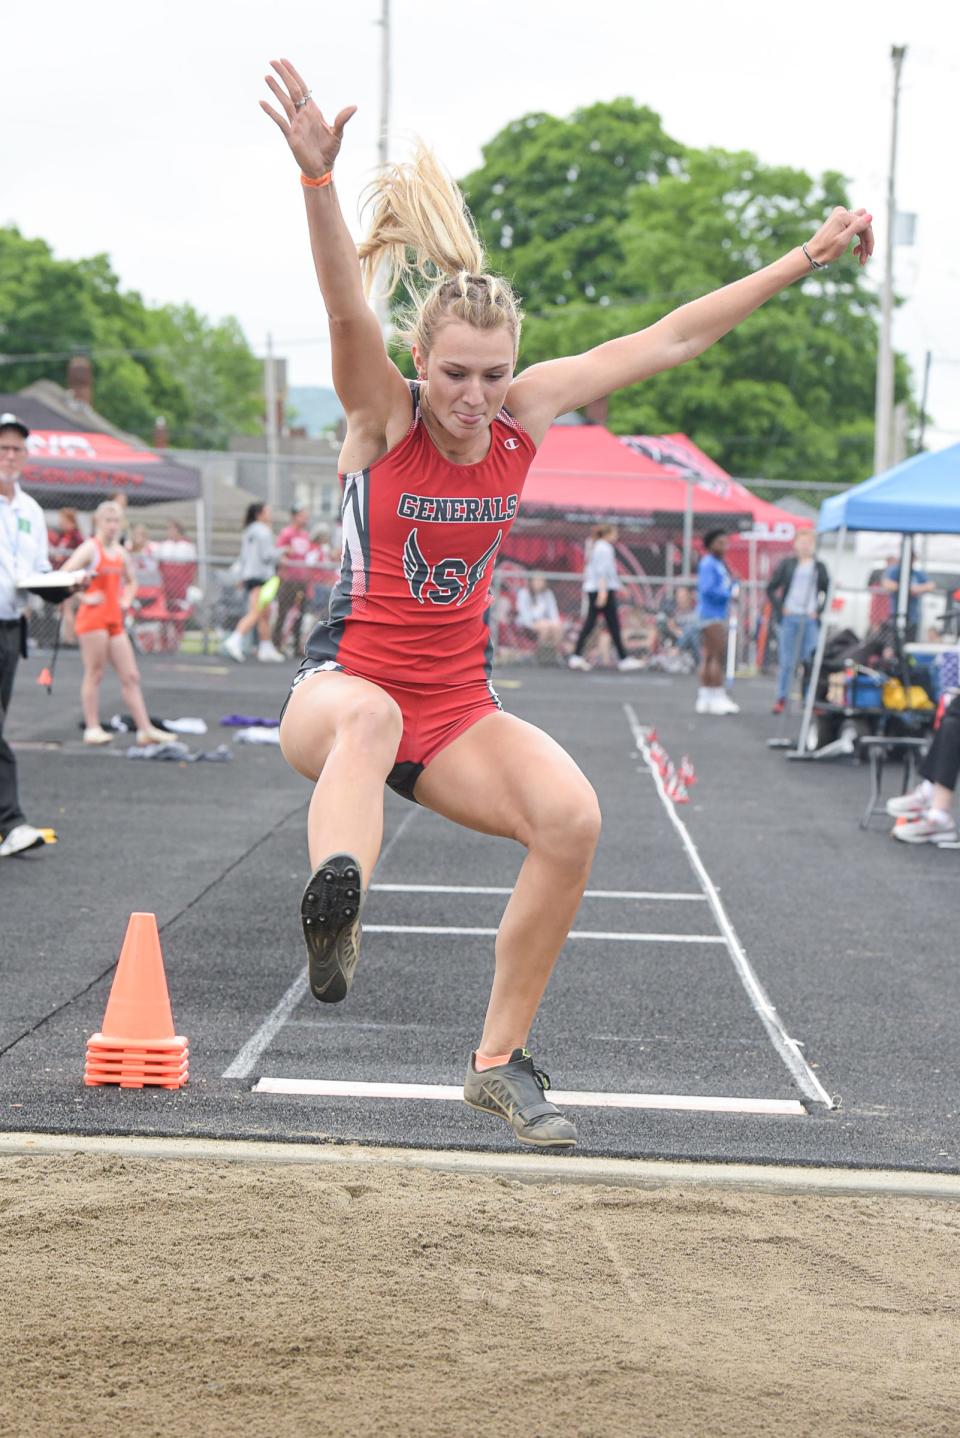 Sheridan’s Katelyn Heath took second place in the girls long jump with a jump of 16-09.5 at the Division II regional track meet held at Chillicothe High School’s Obadiah Harris & Family Athletic Complex on Saturday, May 28, 2022, in Chillicothe, Ohio.